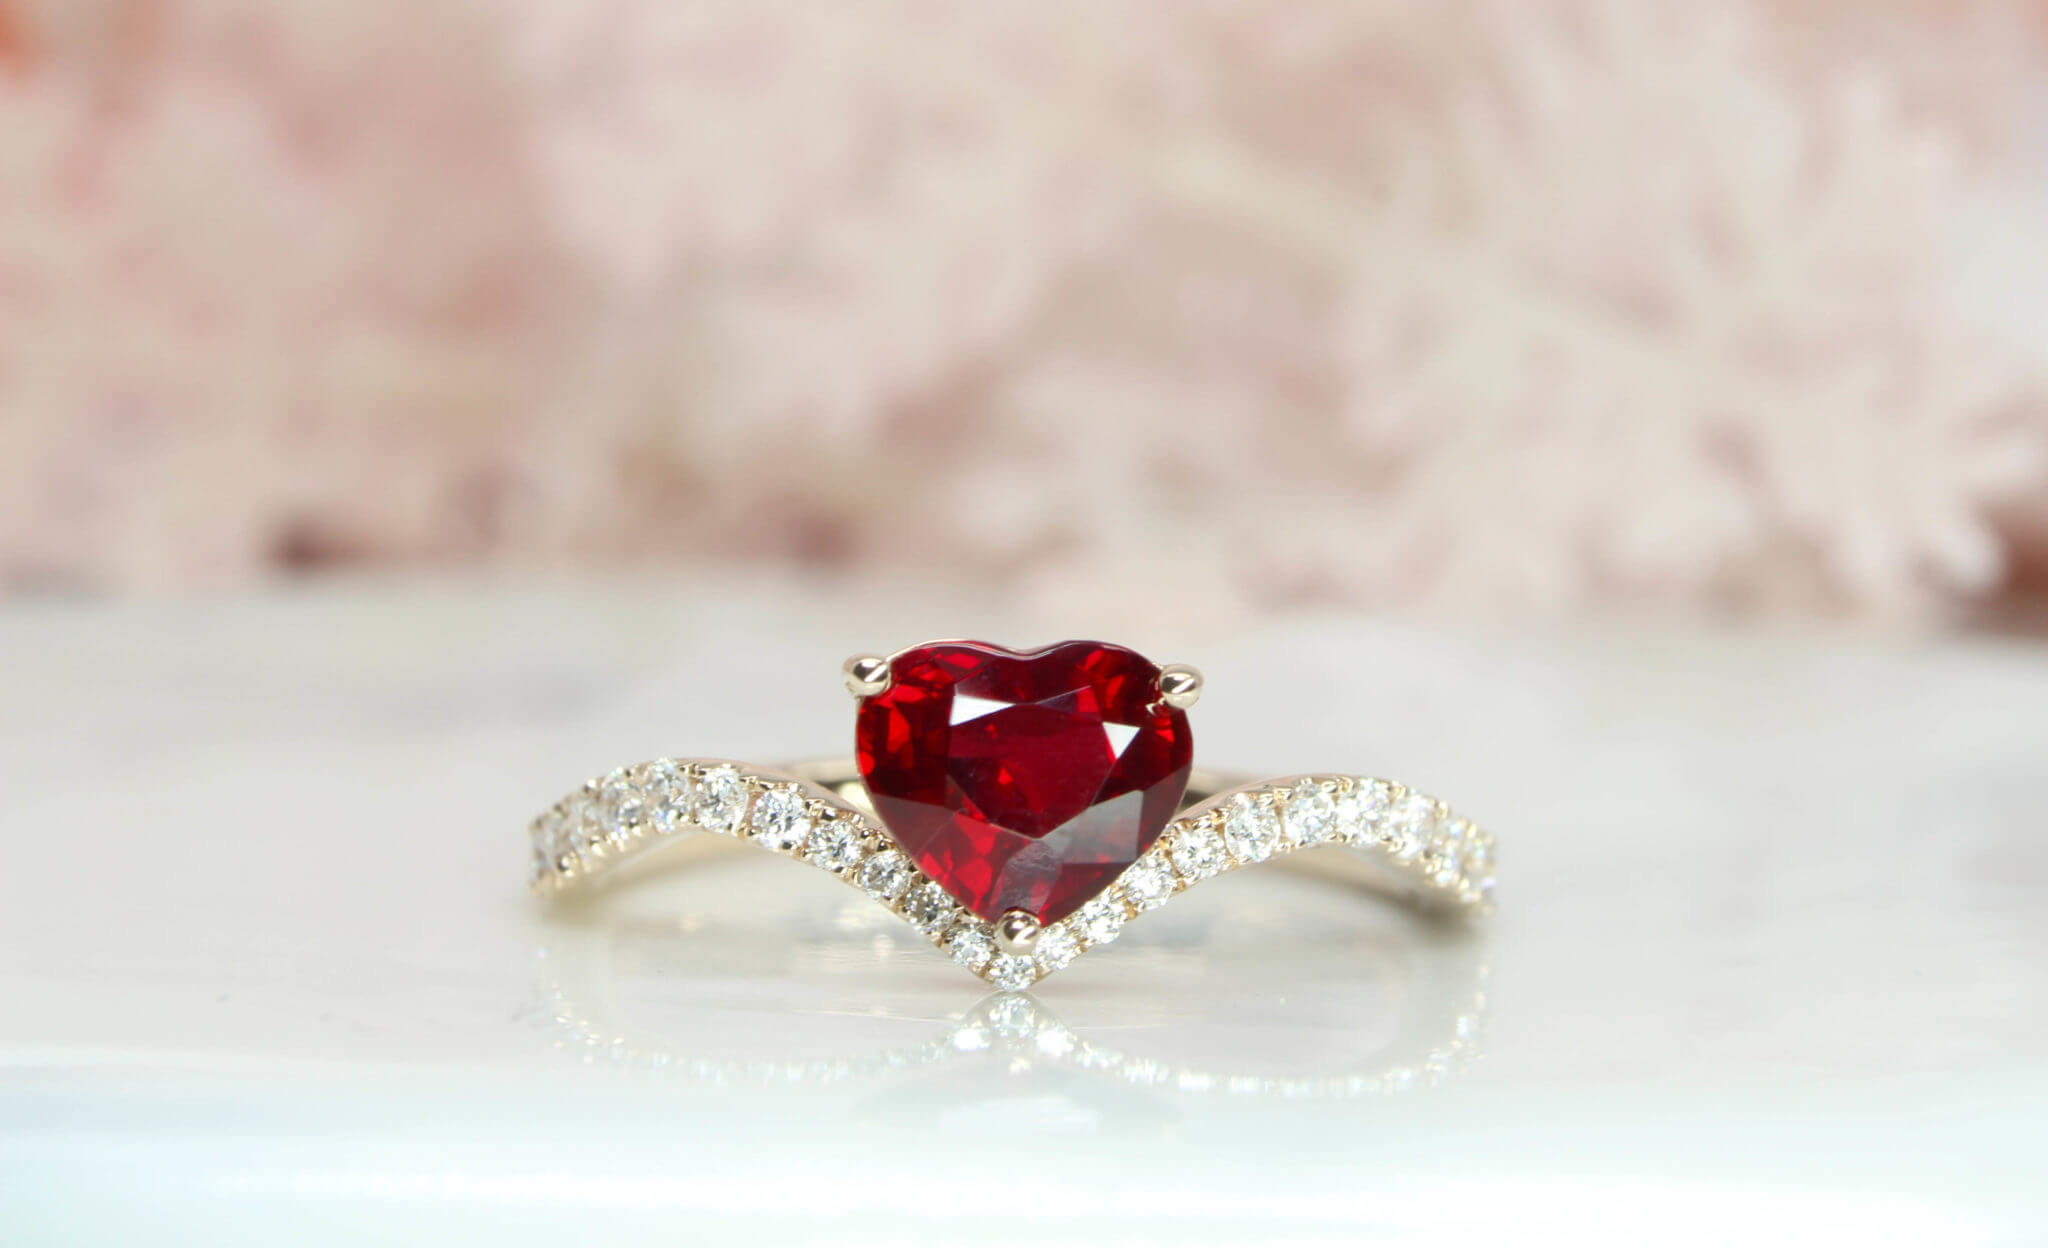 Heartshape Ruby Pigeonblood skilfully cut in well symmetry and polish to give an exceptional brilliance in the ruby. Crafted from sketch to a unique wedding engagement ruby ring | Customised Engagement by local Singapore customised jewellery in wedding jewellery.